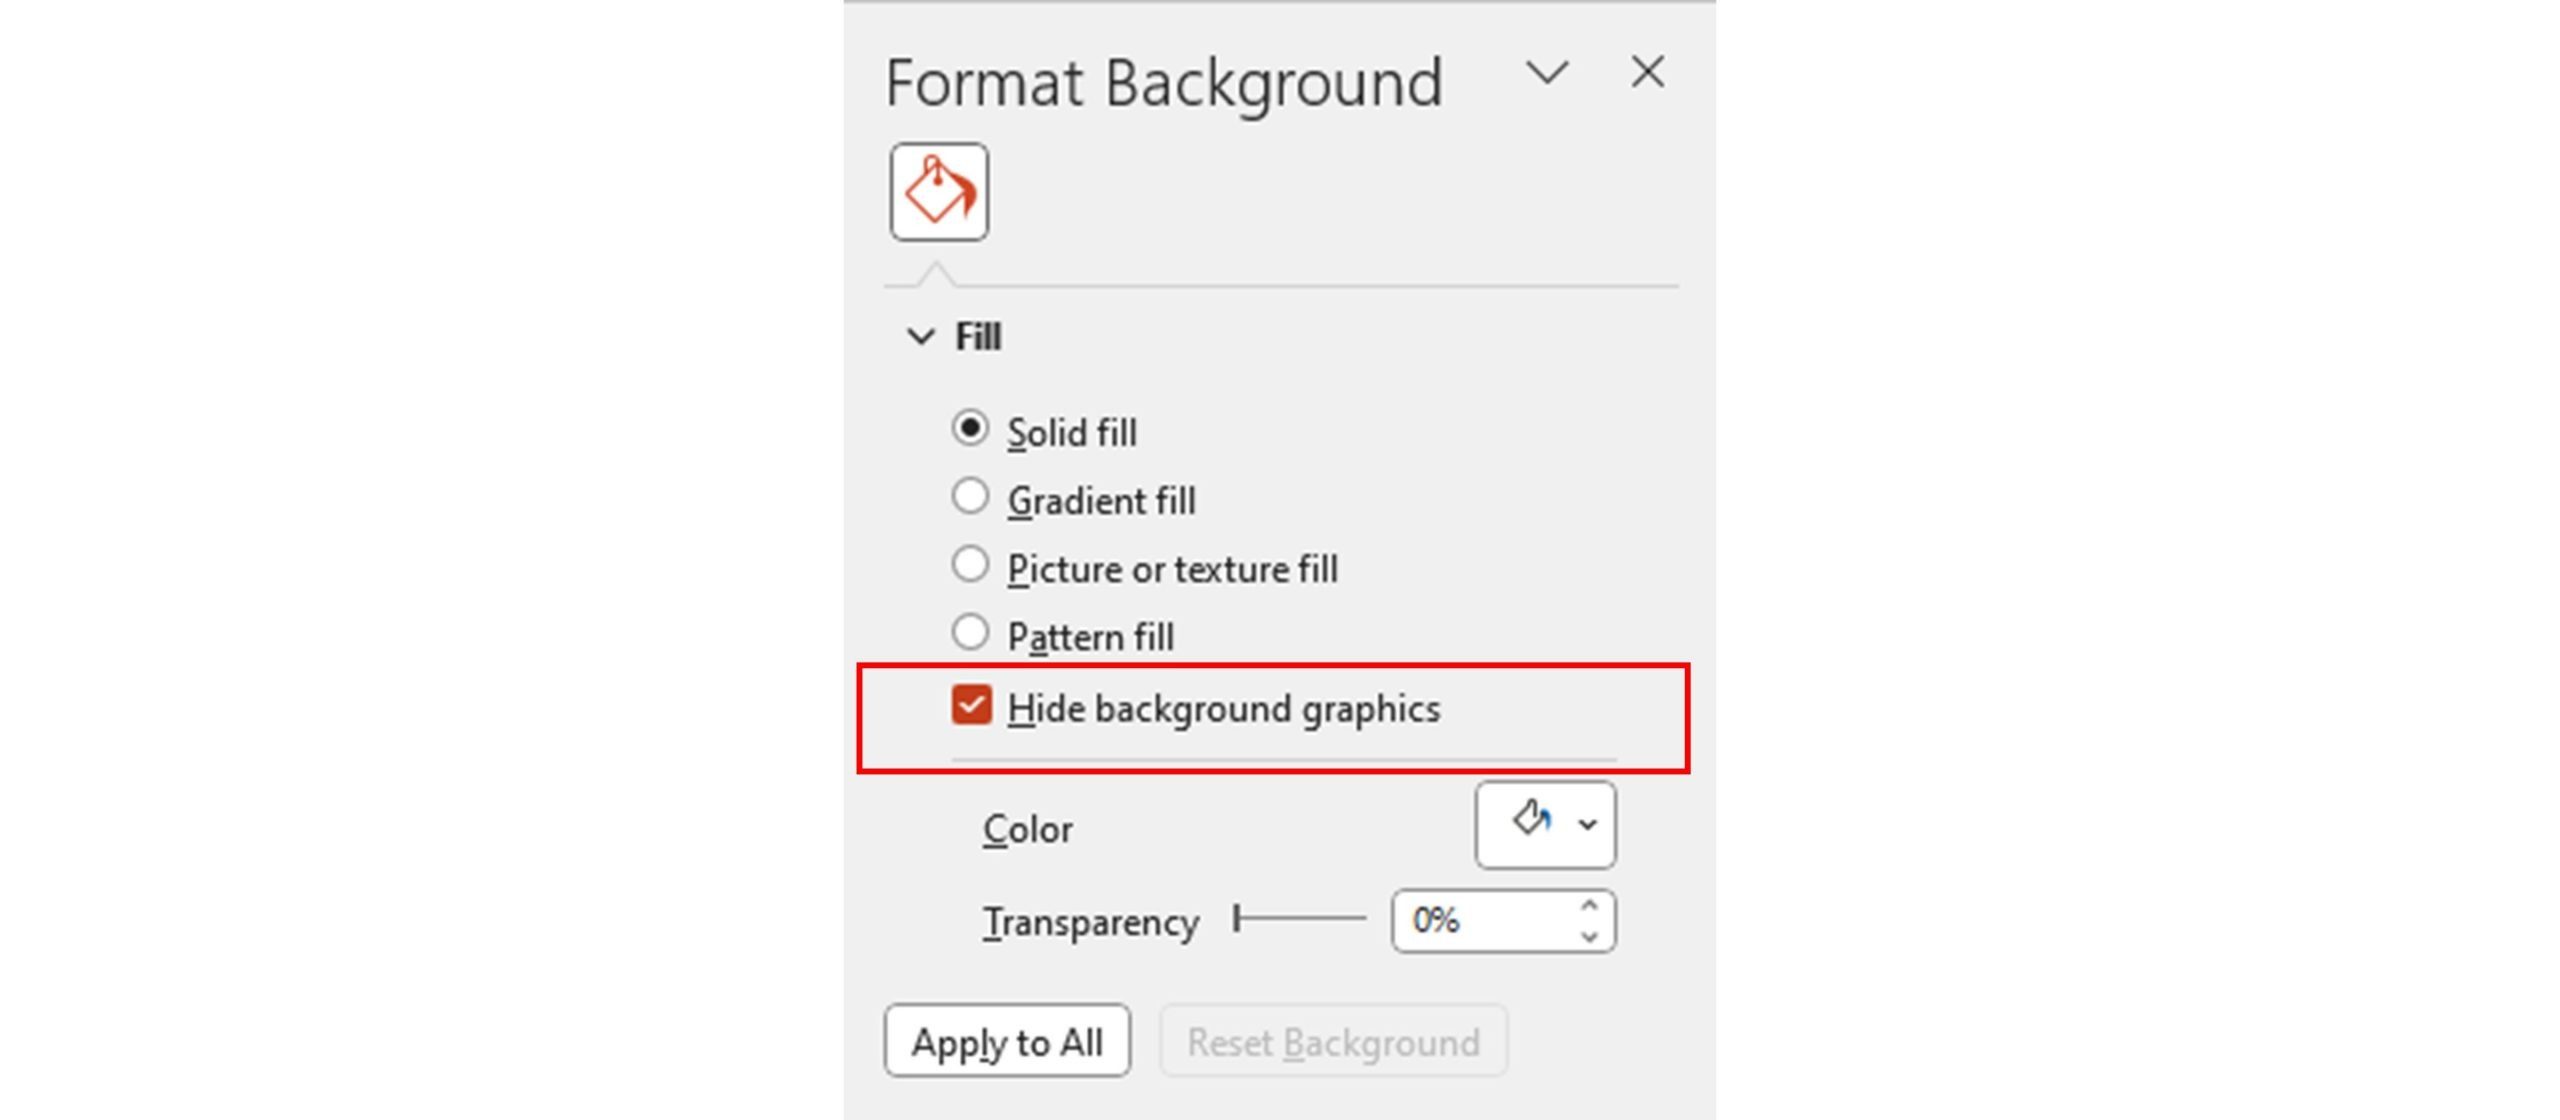 Screenshot of the format background menu in PowerPoint. The Fill option is select and the Hide Background Graphics box is highlighted and checked. 